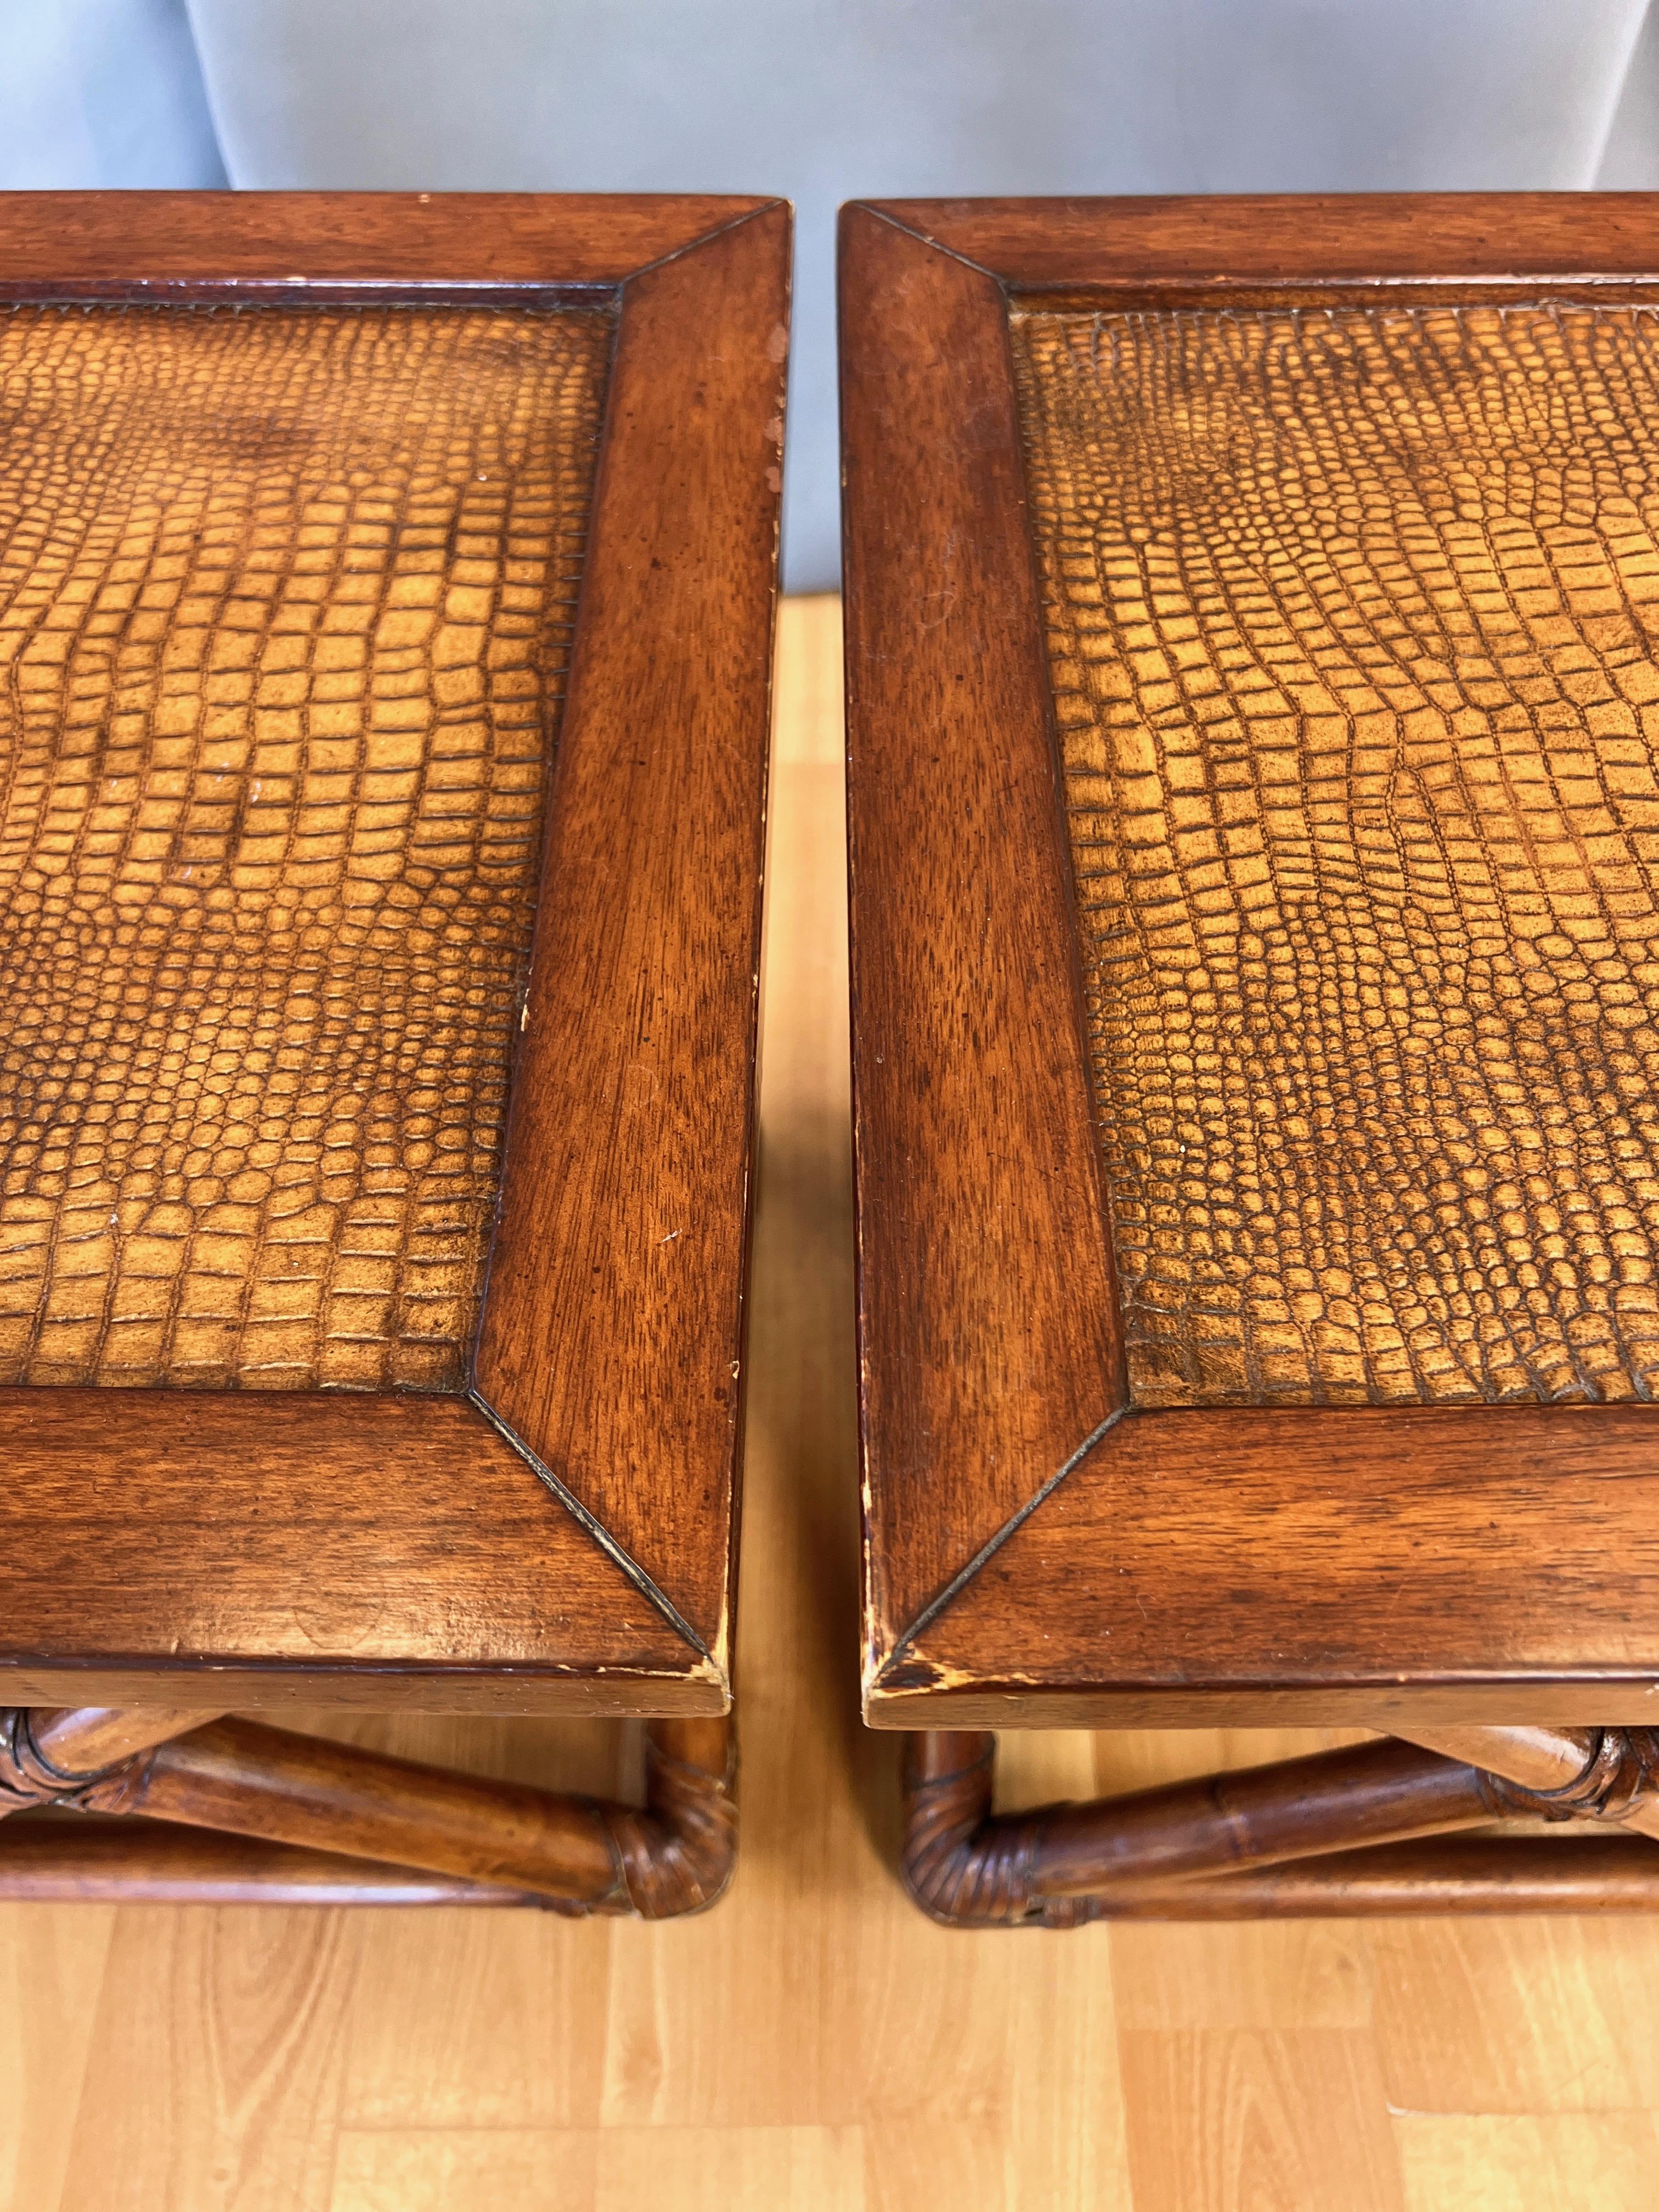 Pair of Palecek Rattan End Tables with Faux Crocodile Leather Tops, c. 2010 For Sale 10